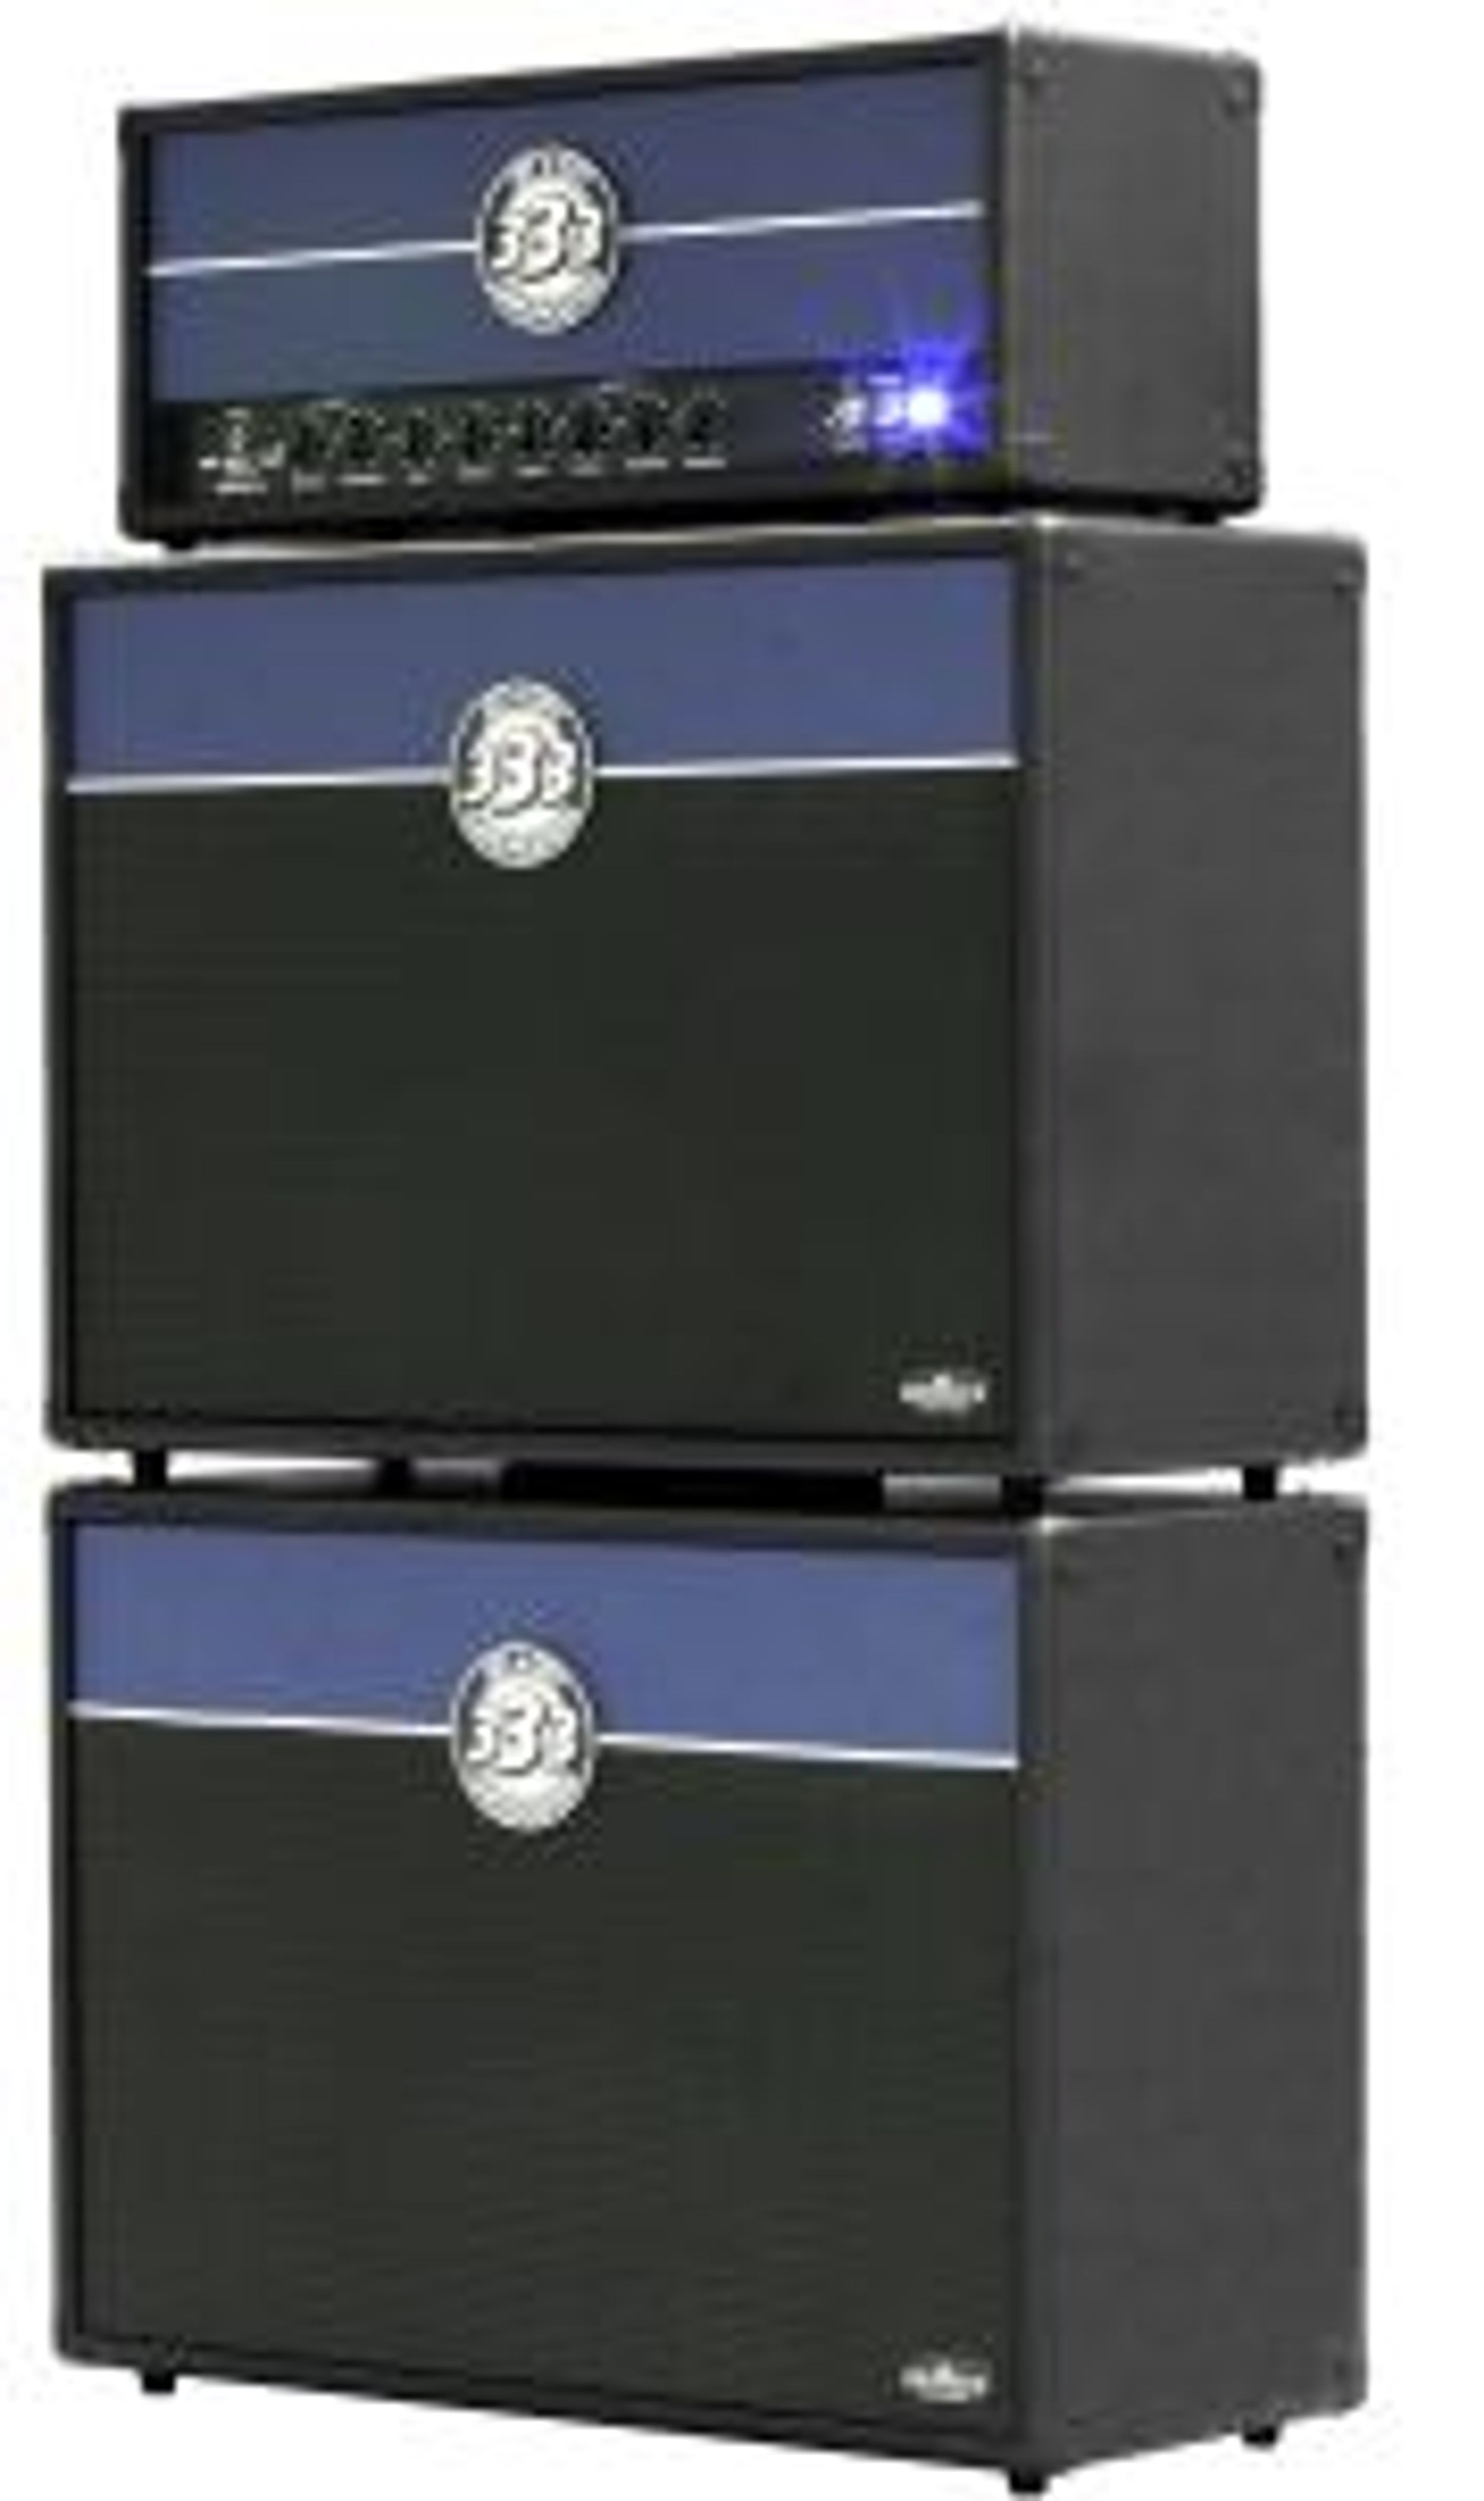 Jet City Amplification Debuts First Amps